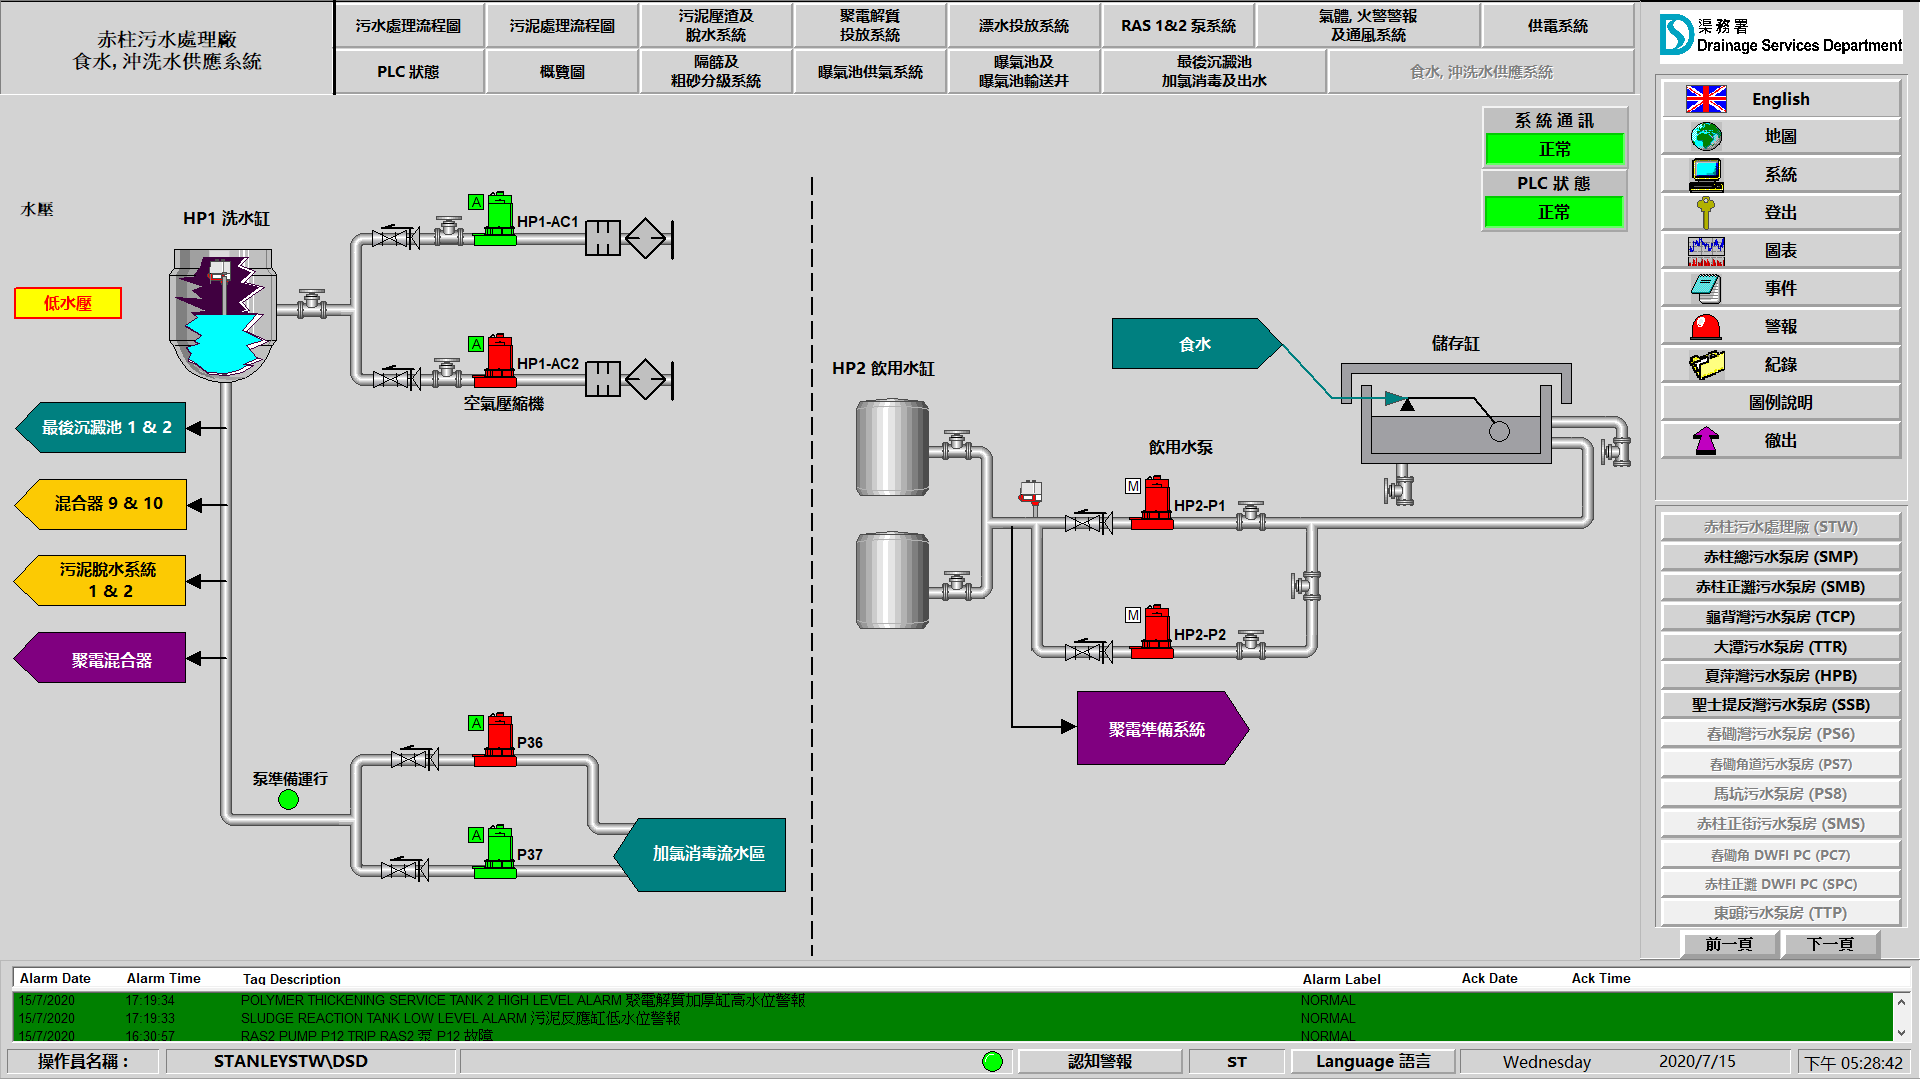 Prtable, Flushing Water & Wastewater Supply System screenshot from FactoryTalk View After Works in DSD Stanley STW (Typical)